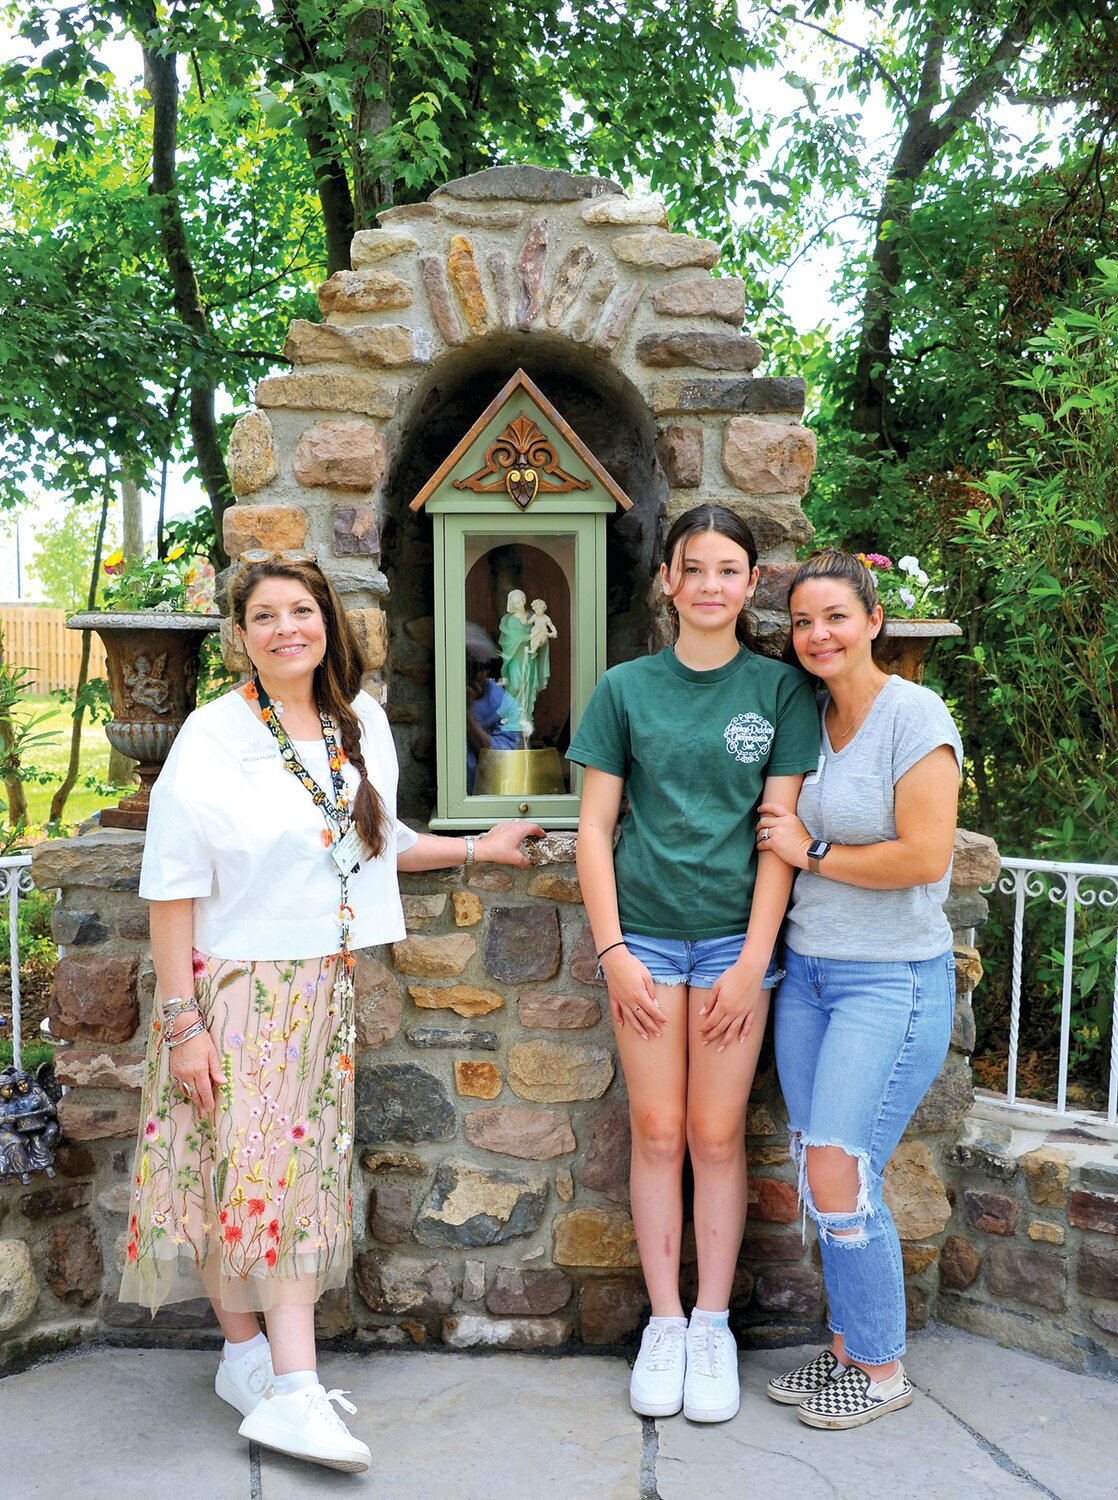 At the Zegels’ “Avocation Acre,” a community vegetable garden with barn, apiary and chapel, are Melissa Palmer, Amelia Tracy and Jackie Chapman.